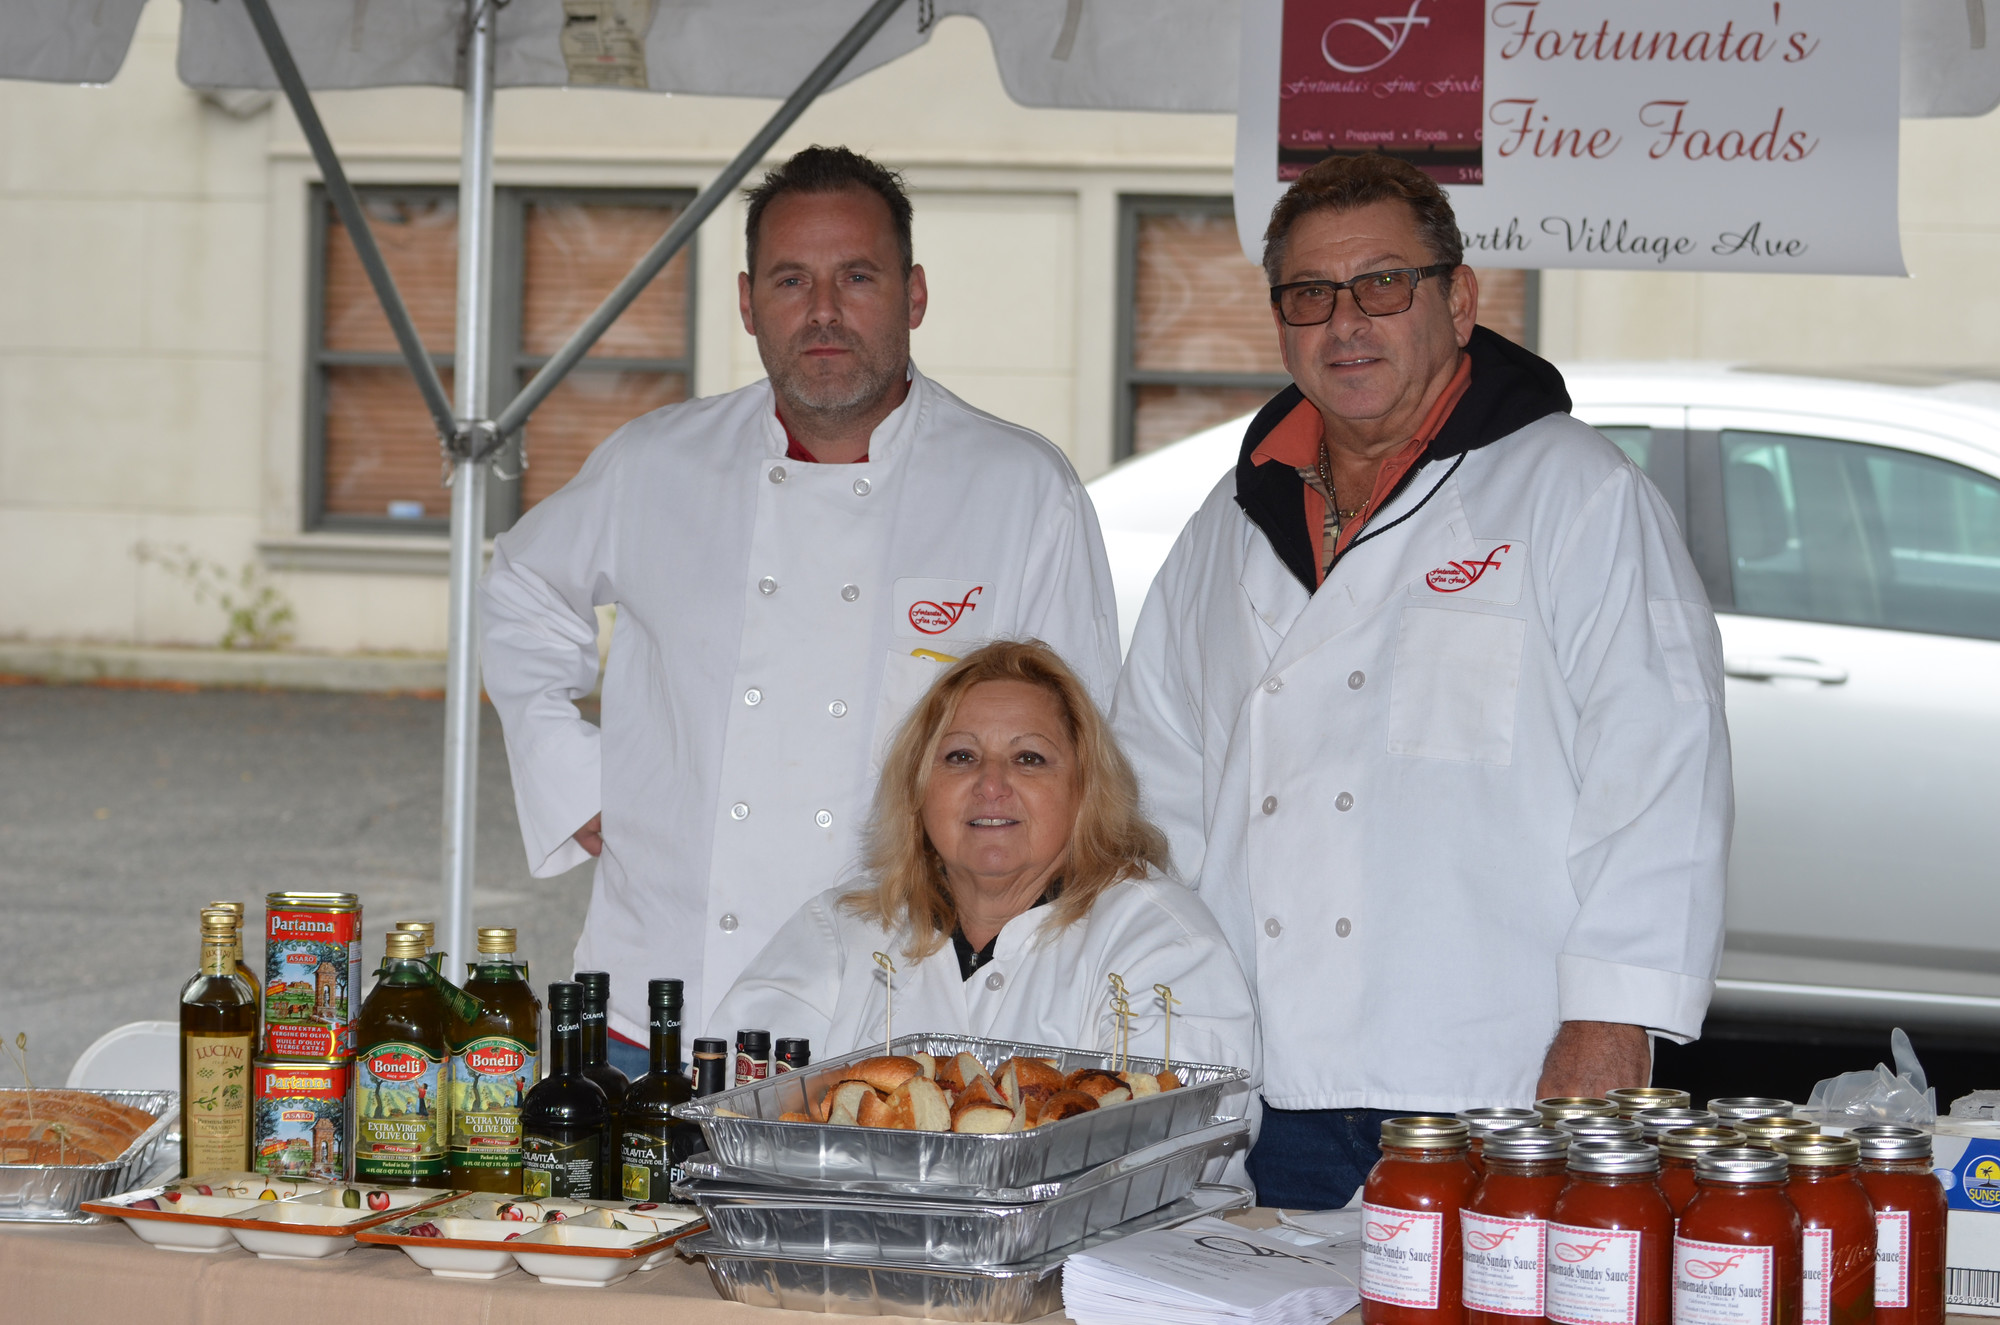 Owner Fred Cetra, Susan Tardugno and Nick Tardugno of Fortunata’s Fine Foods were serving up some of their signature dishes.